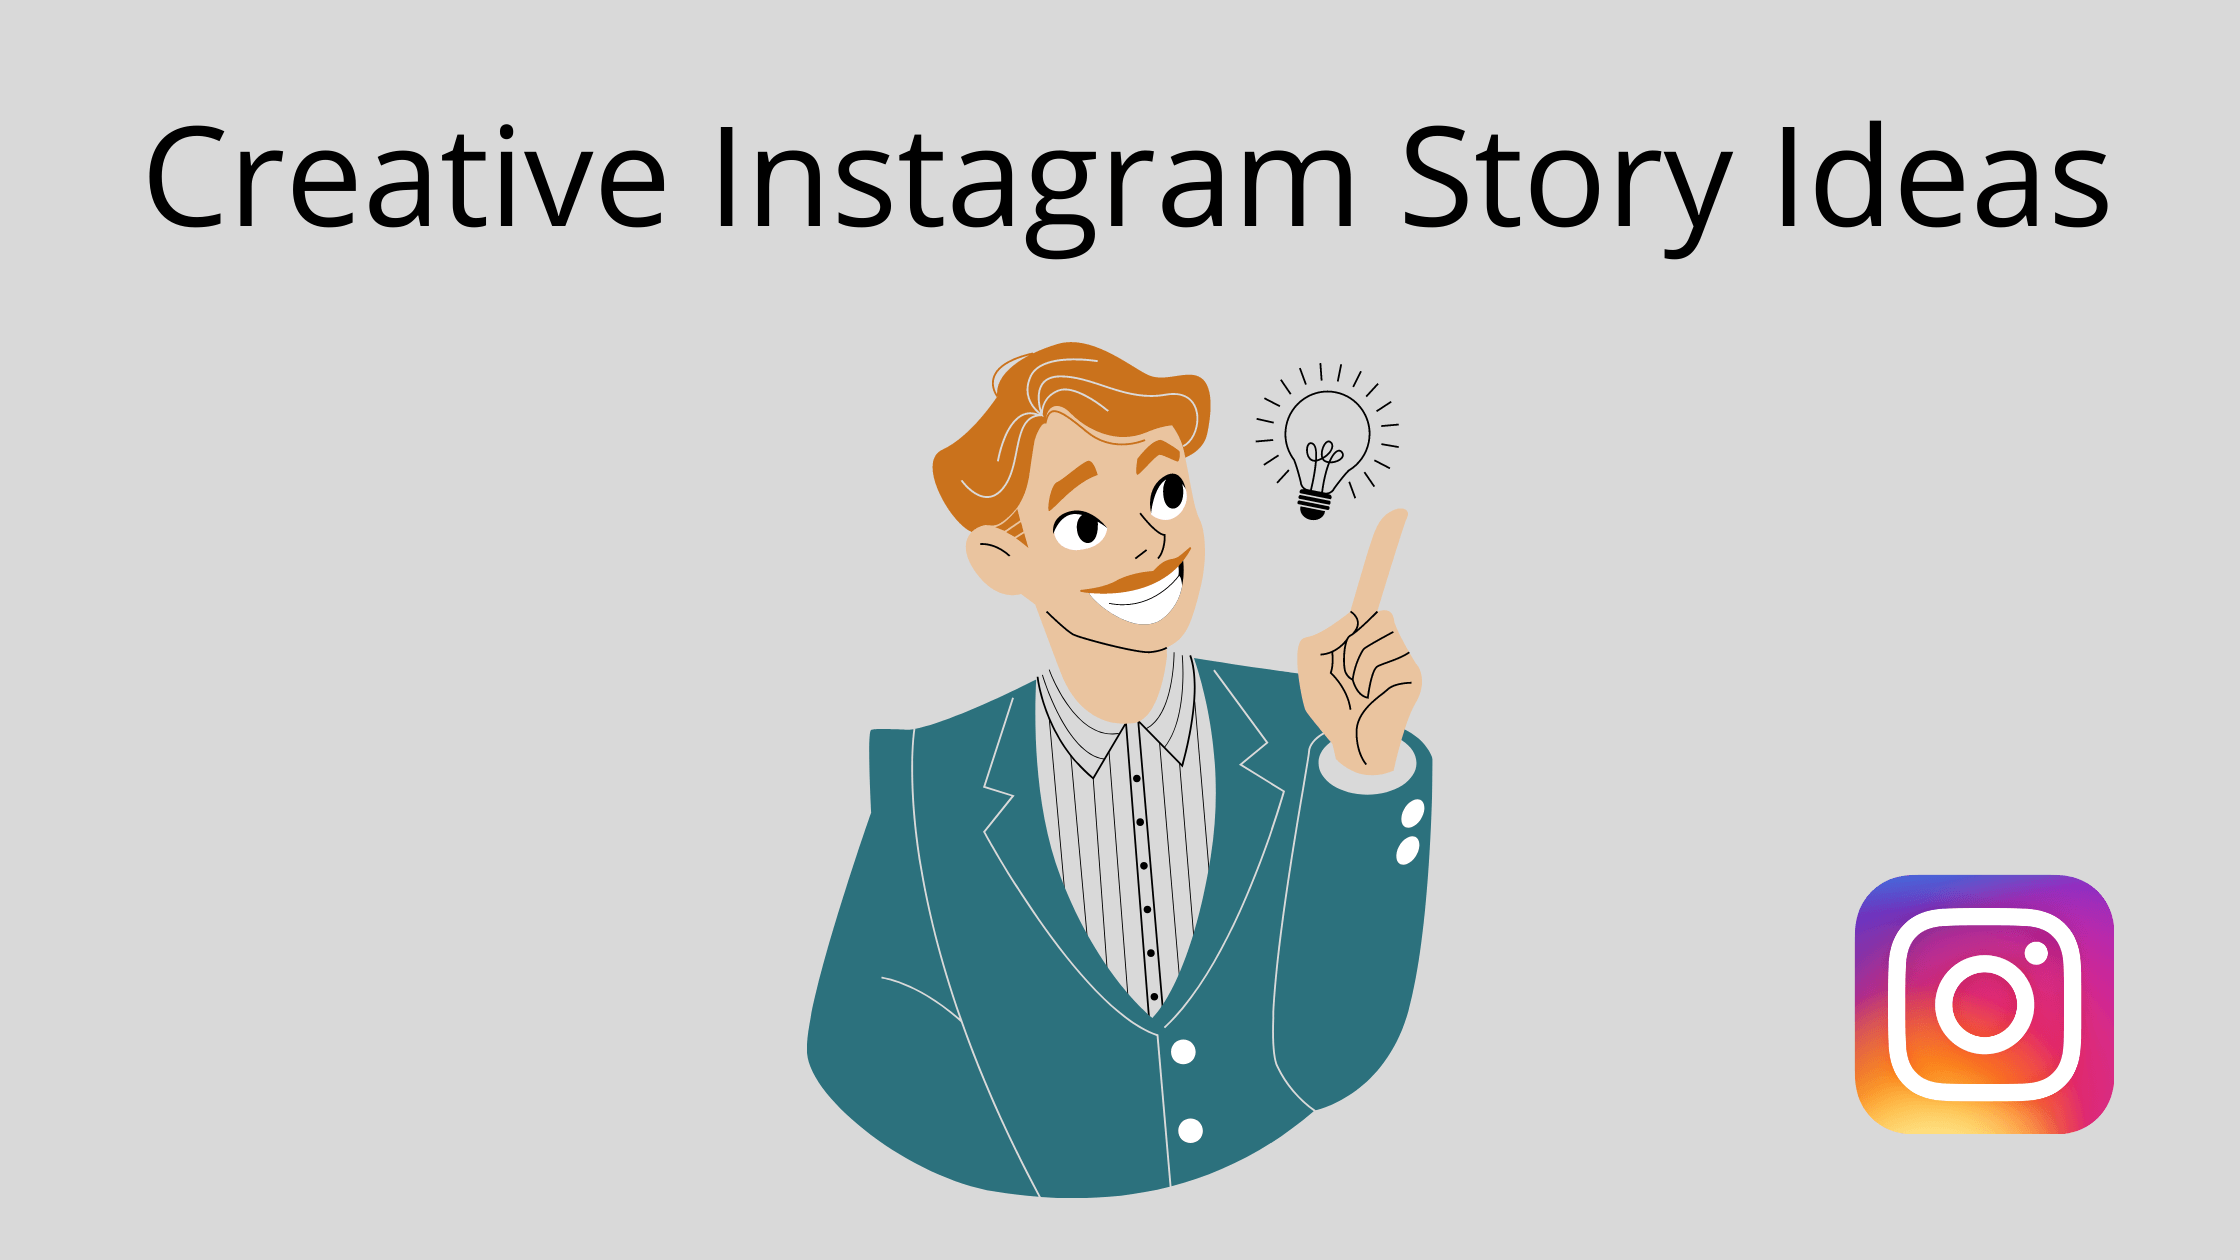 20+ Creative Instagram Story Ideas To Engage Your Followers - Seeromega